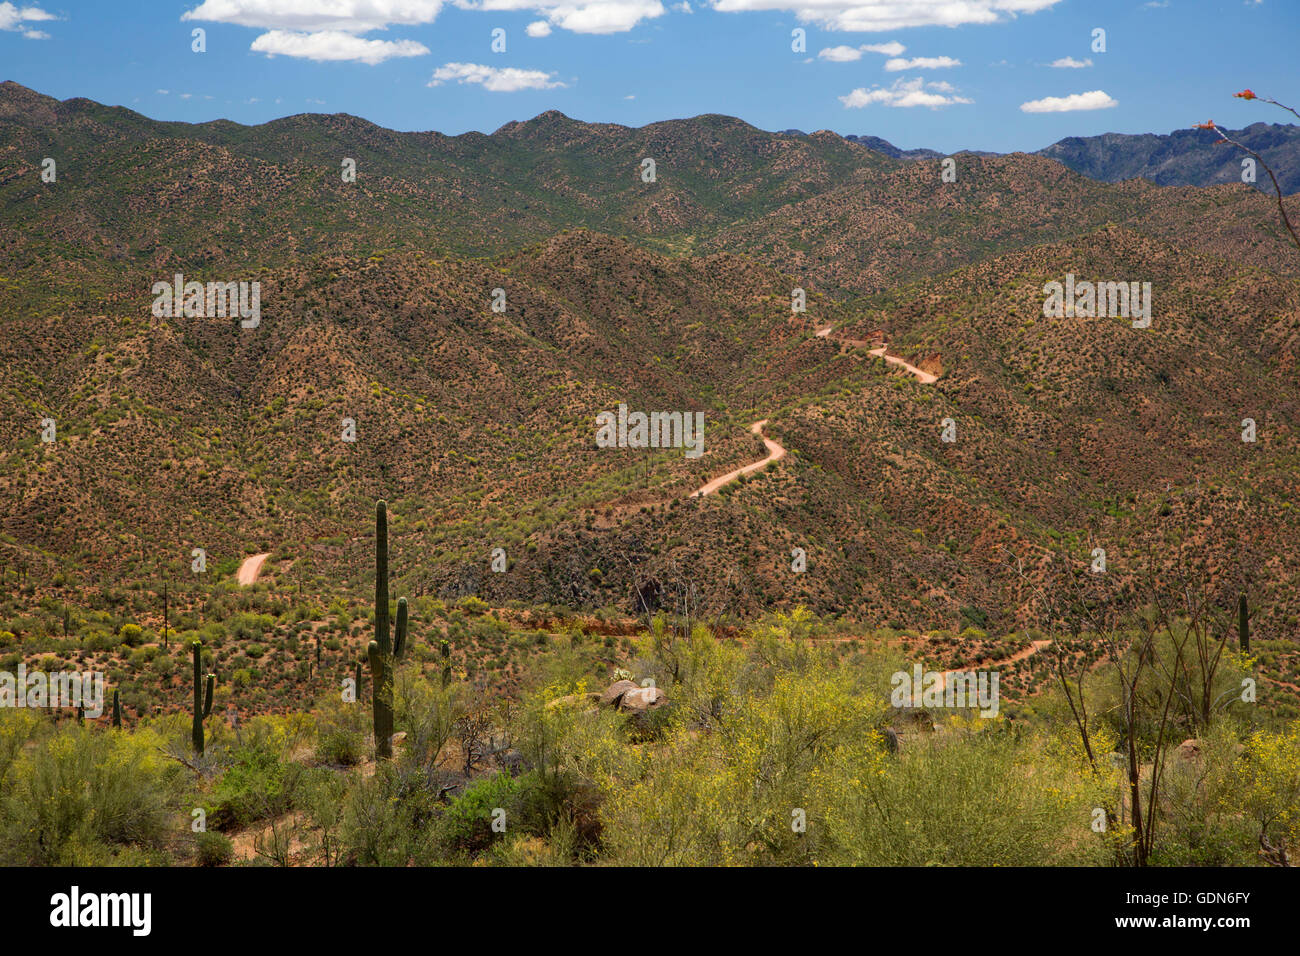 Deserto byway, Apache Trail Scenic Byway, Tonto National Forest, Arizona Foto Stock